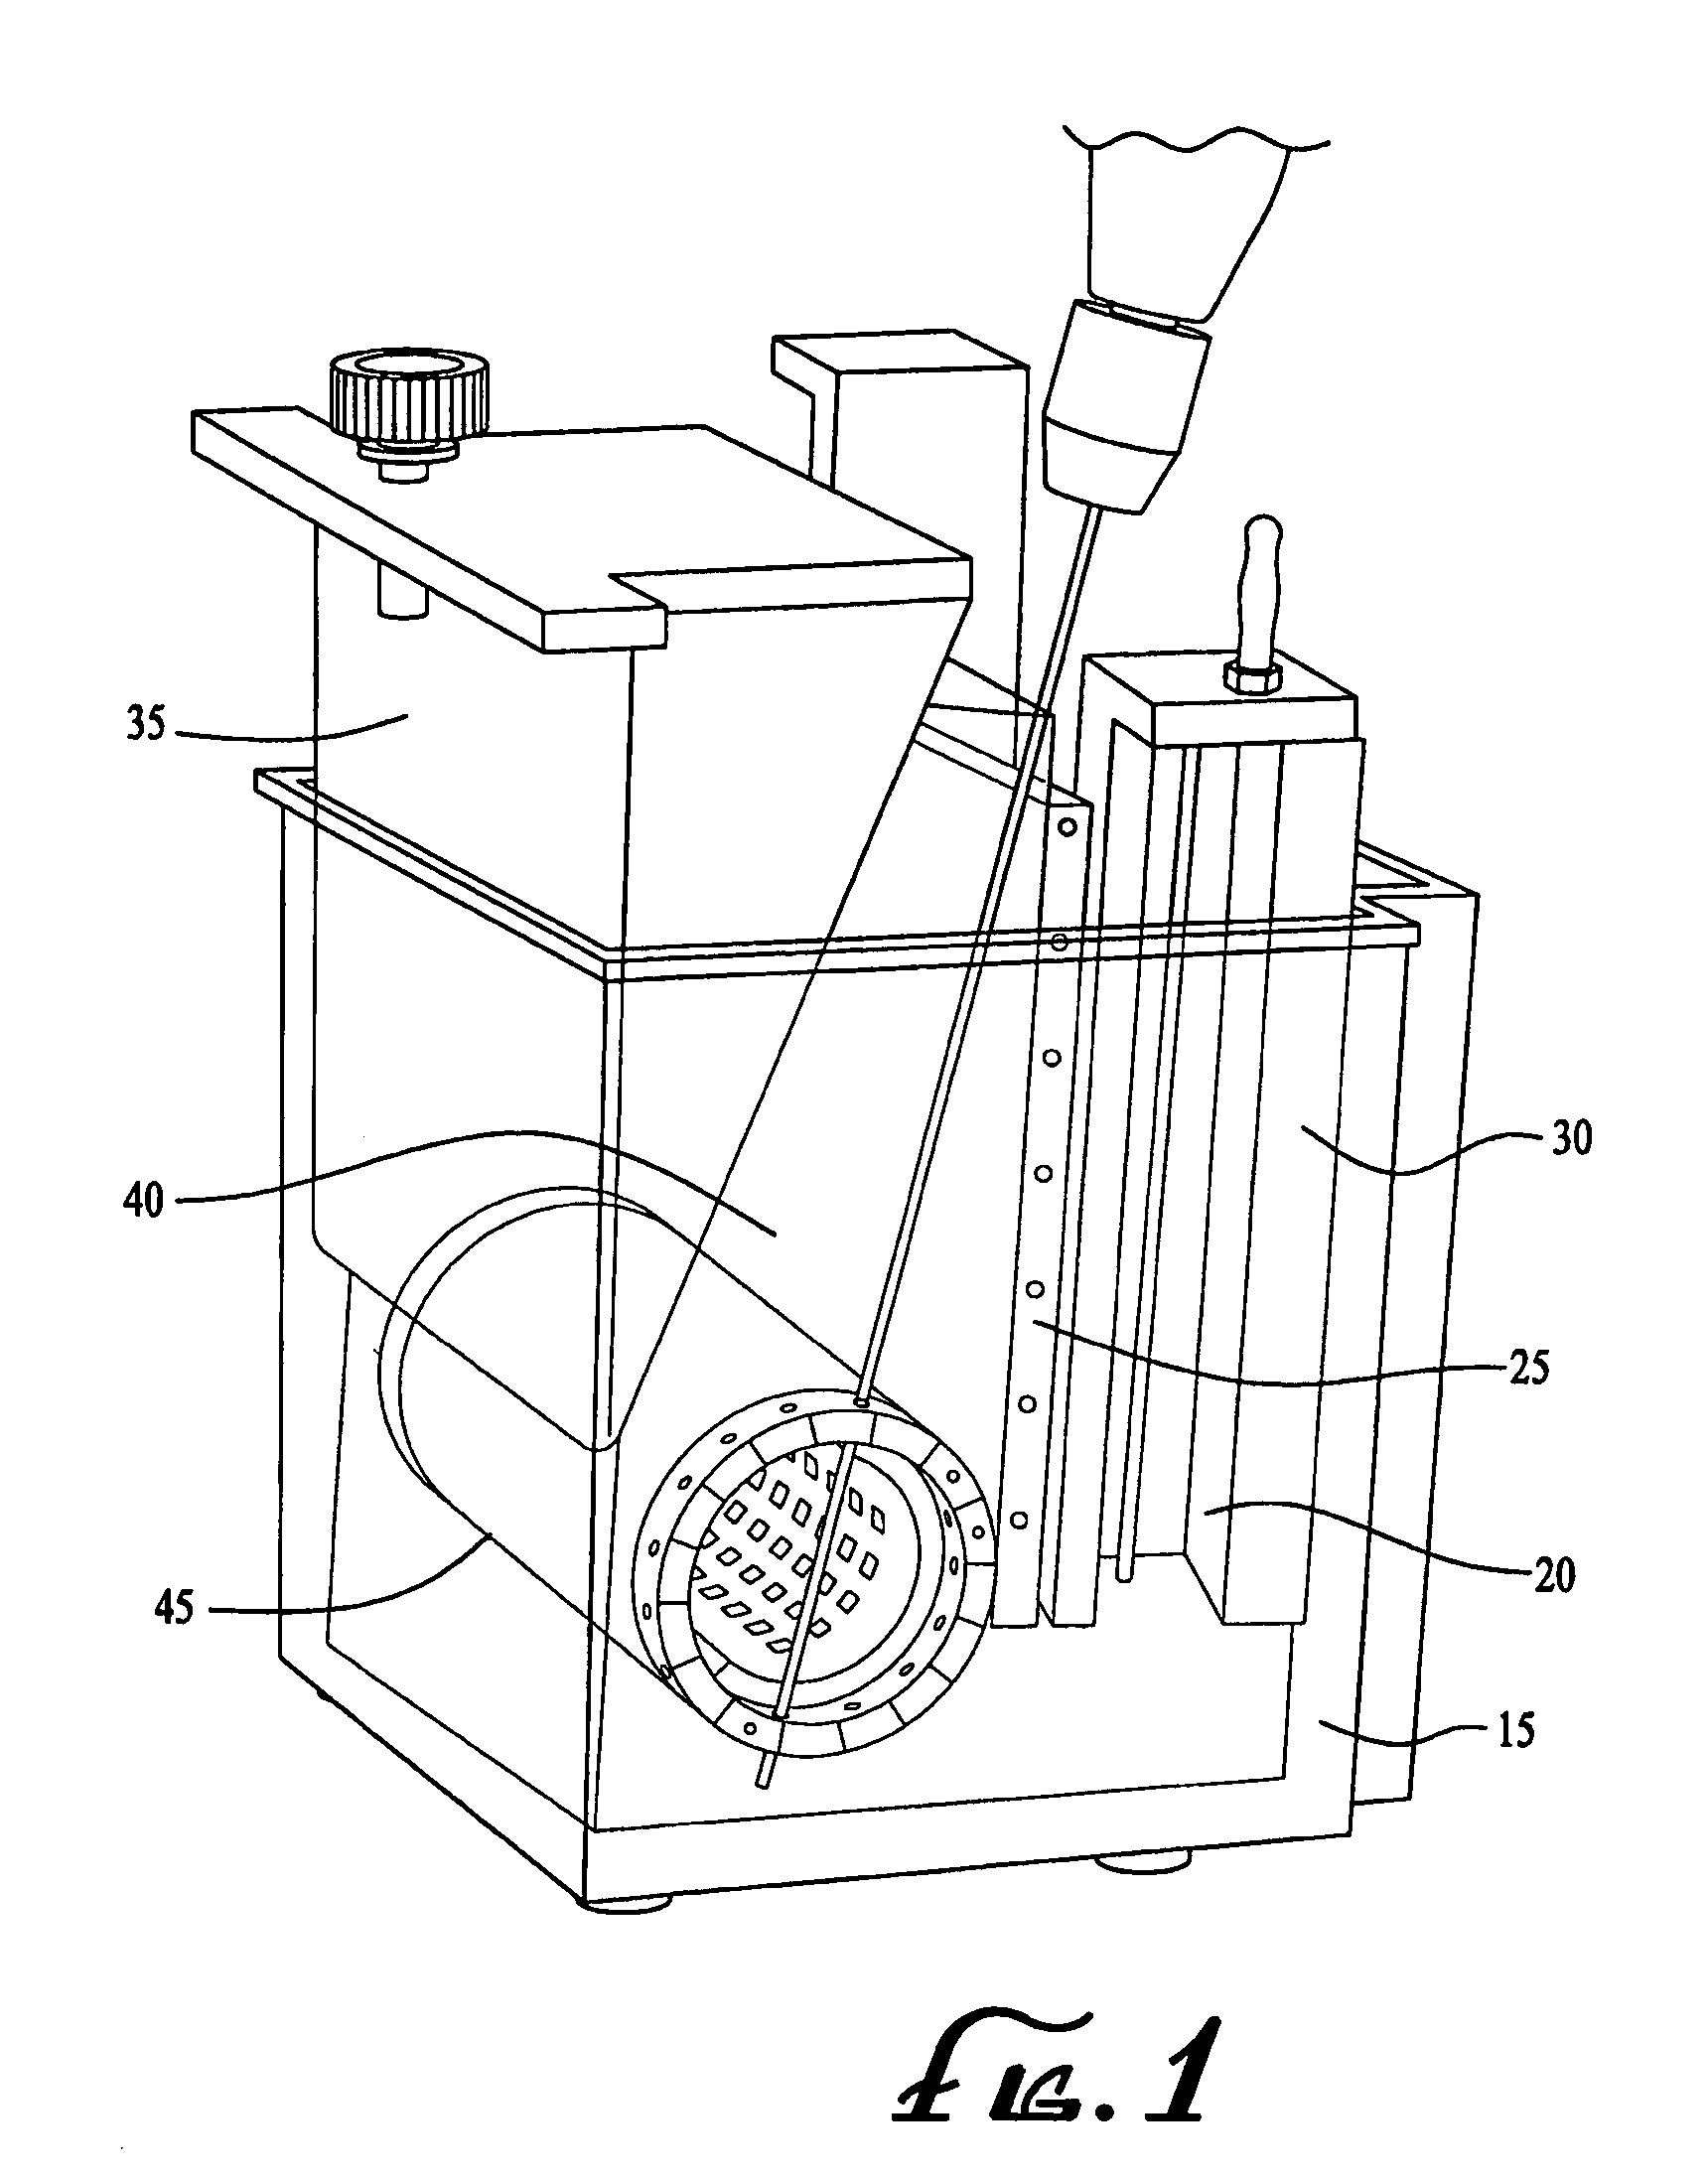 Device for sequential protein transfer from a gel